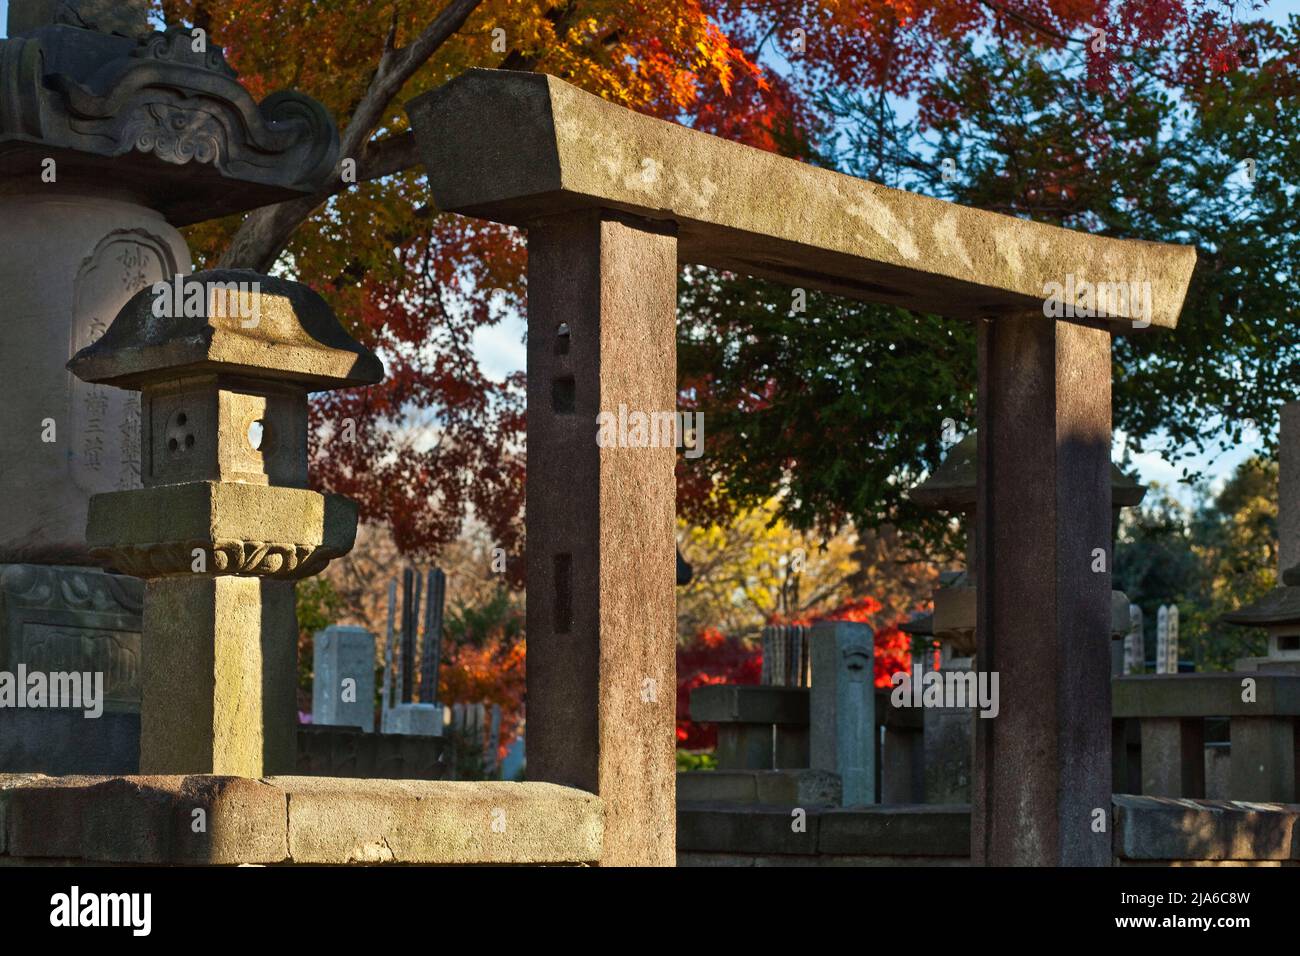 Cemetery markers and gate Ikegami Honmonji Temple autumn Tokyo Japan Stock Photo